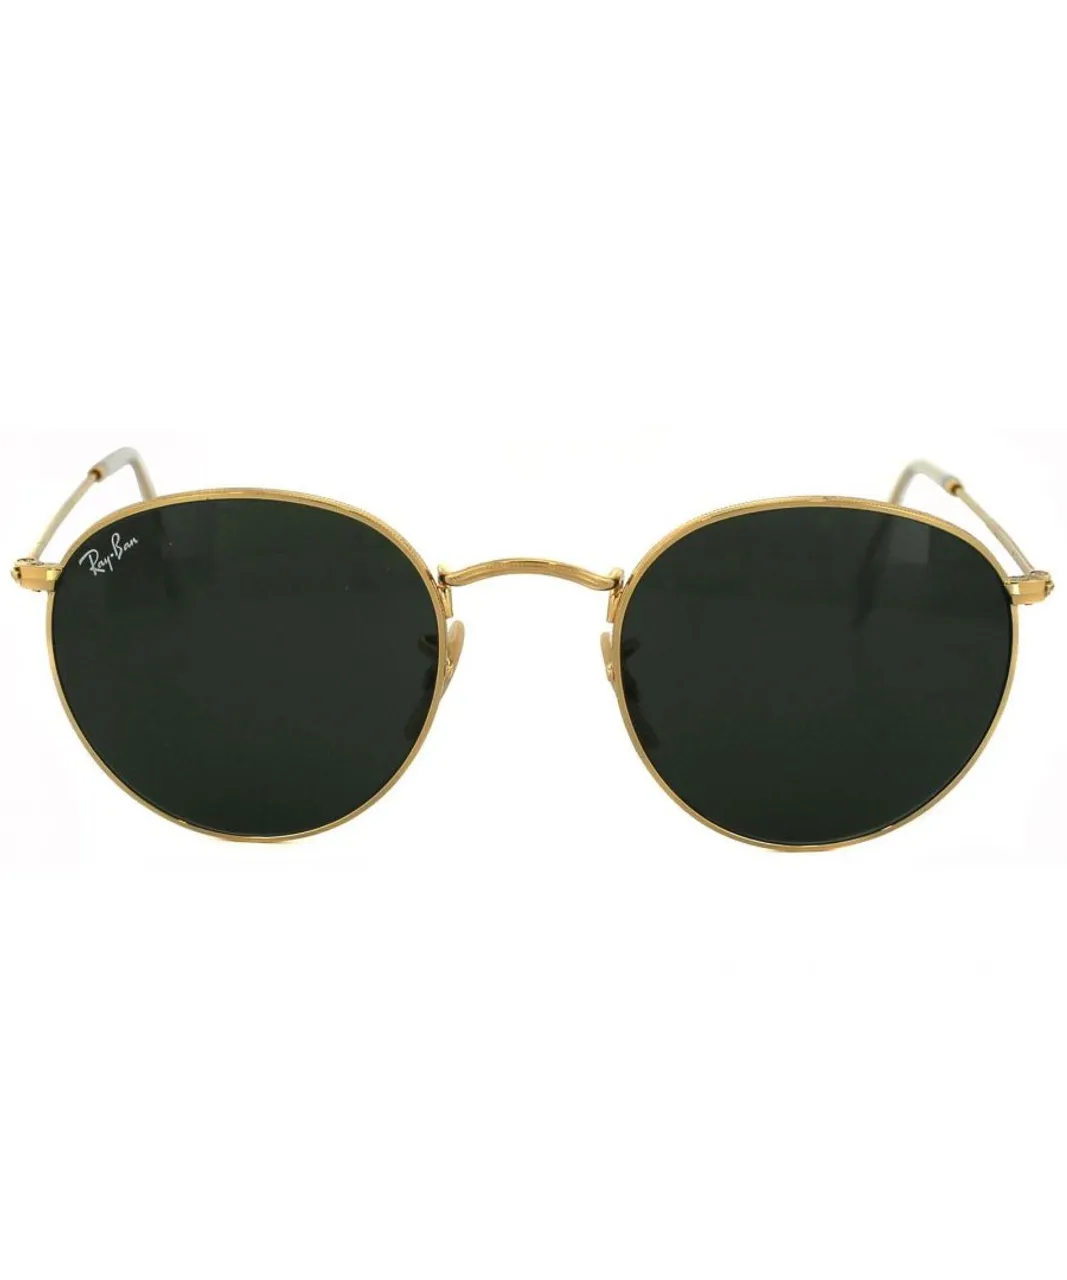 Ray-Ban Unisex Sunglasses Round Metal 3447 001 Gold Green 50mm - One